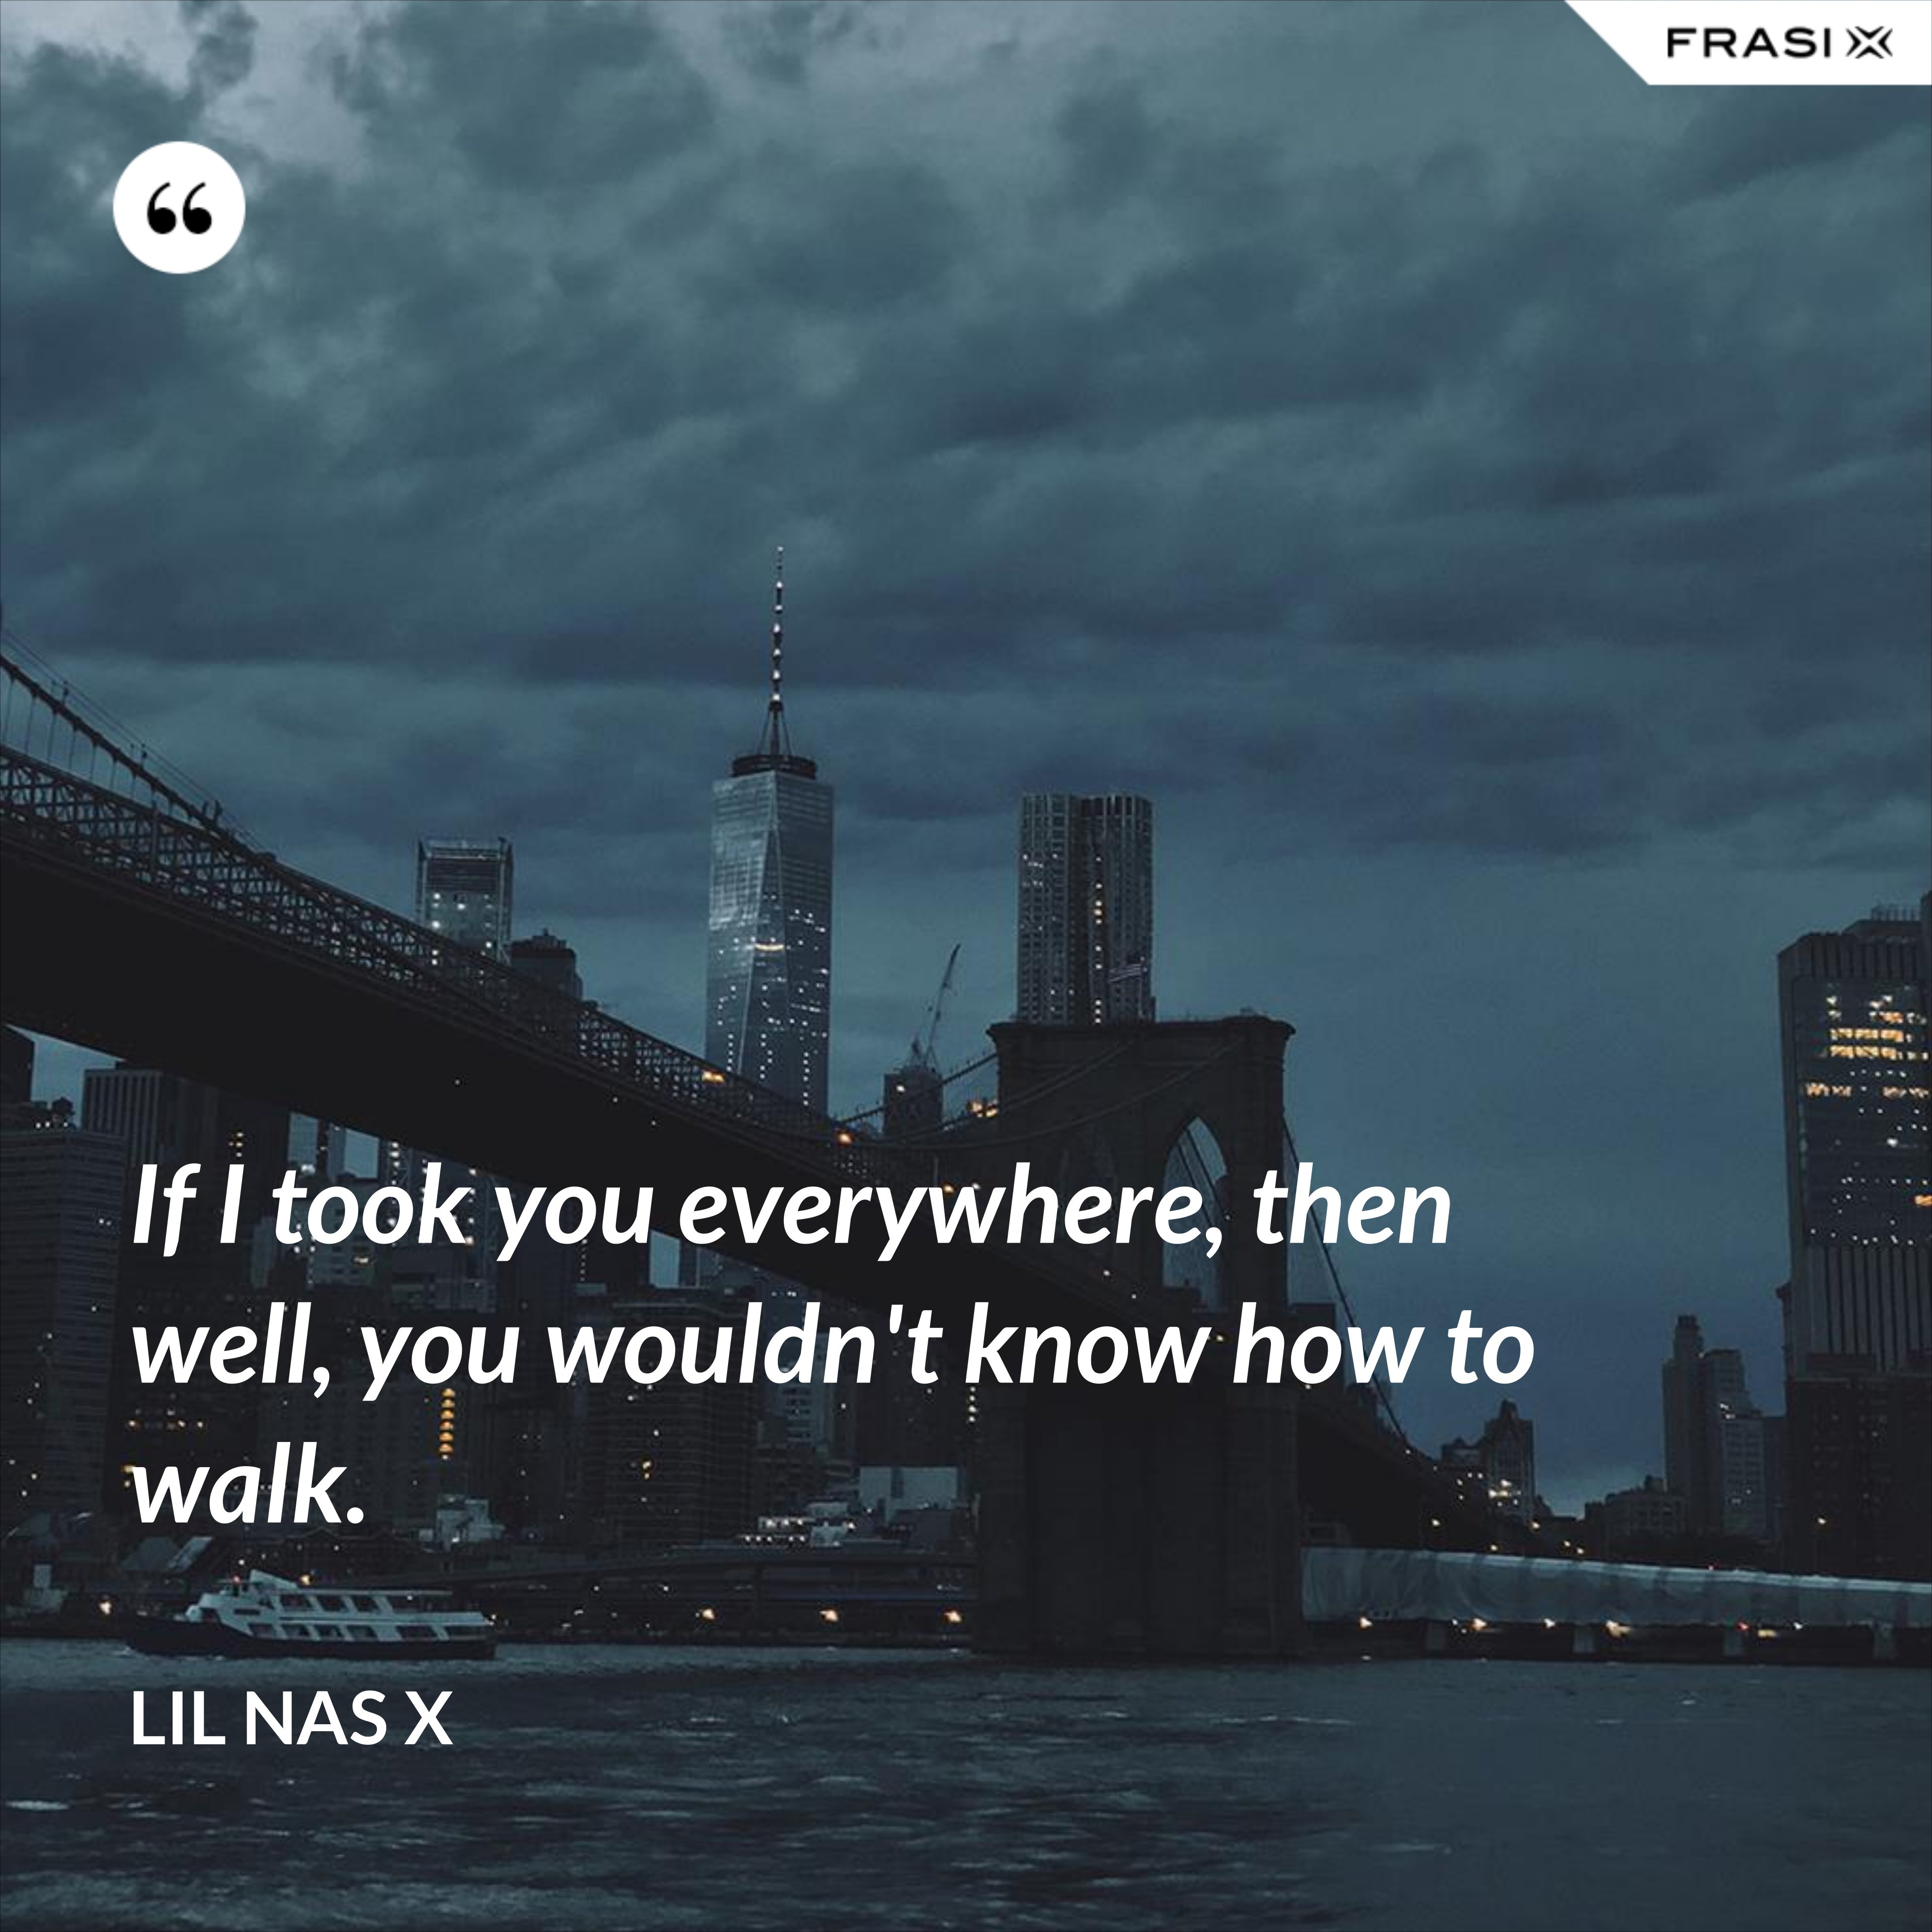 If I took you everywhere, then well, you wouldn't know how to walk. - Lil Nas X